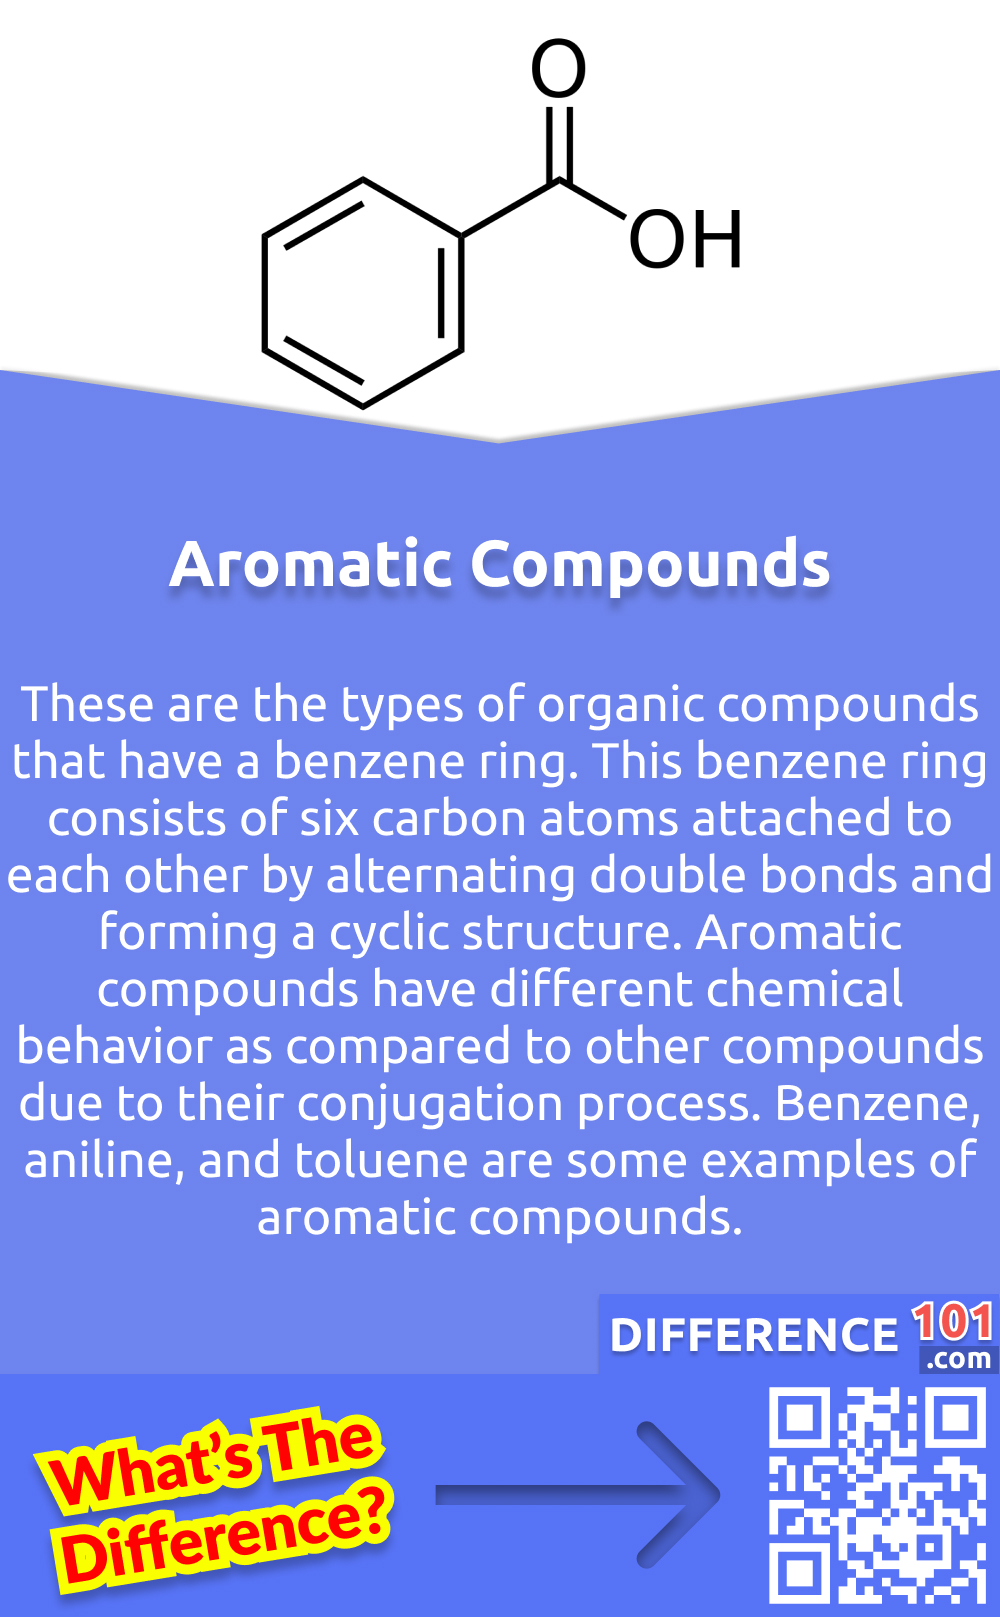 What Are Aromatic Compounds? These are the types of organic compounds that have a benzene ring. This benzene ring consists of six carbon atoms attached to each other by alternating double bonds and forming a cyclic structure. Aromatic compounds have different chemical behavior as compared to other compounds due to their conjugation process. Benzene, aniline, and toluene are some examples of aromatic compounds.